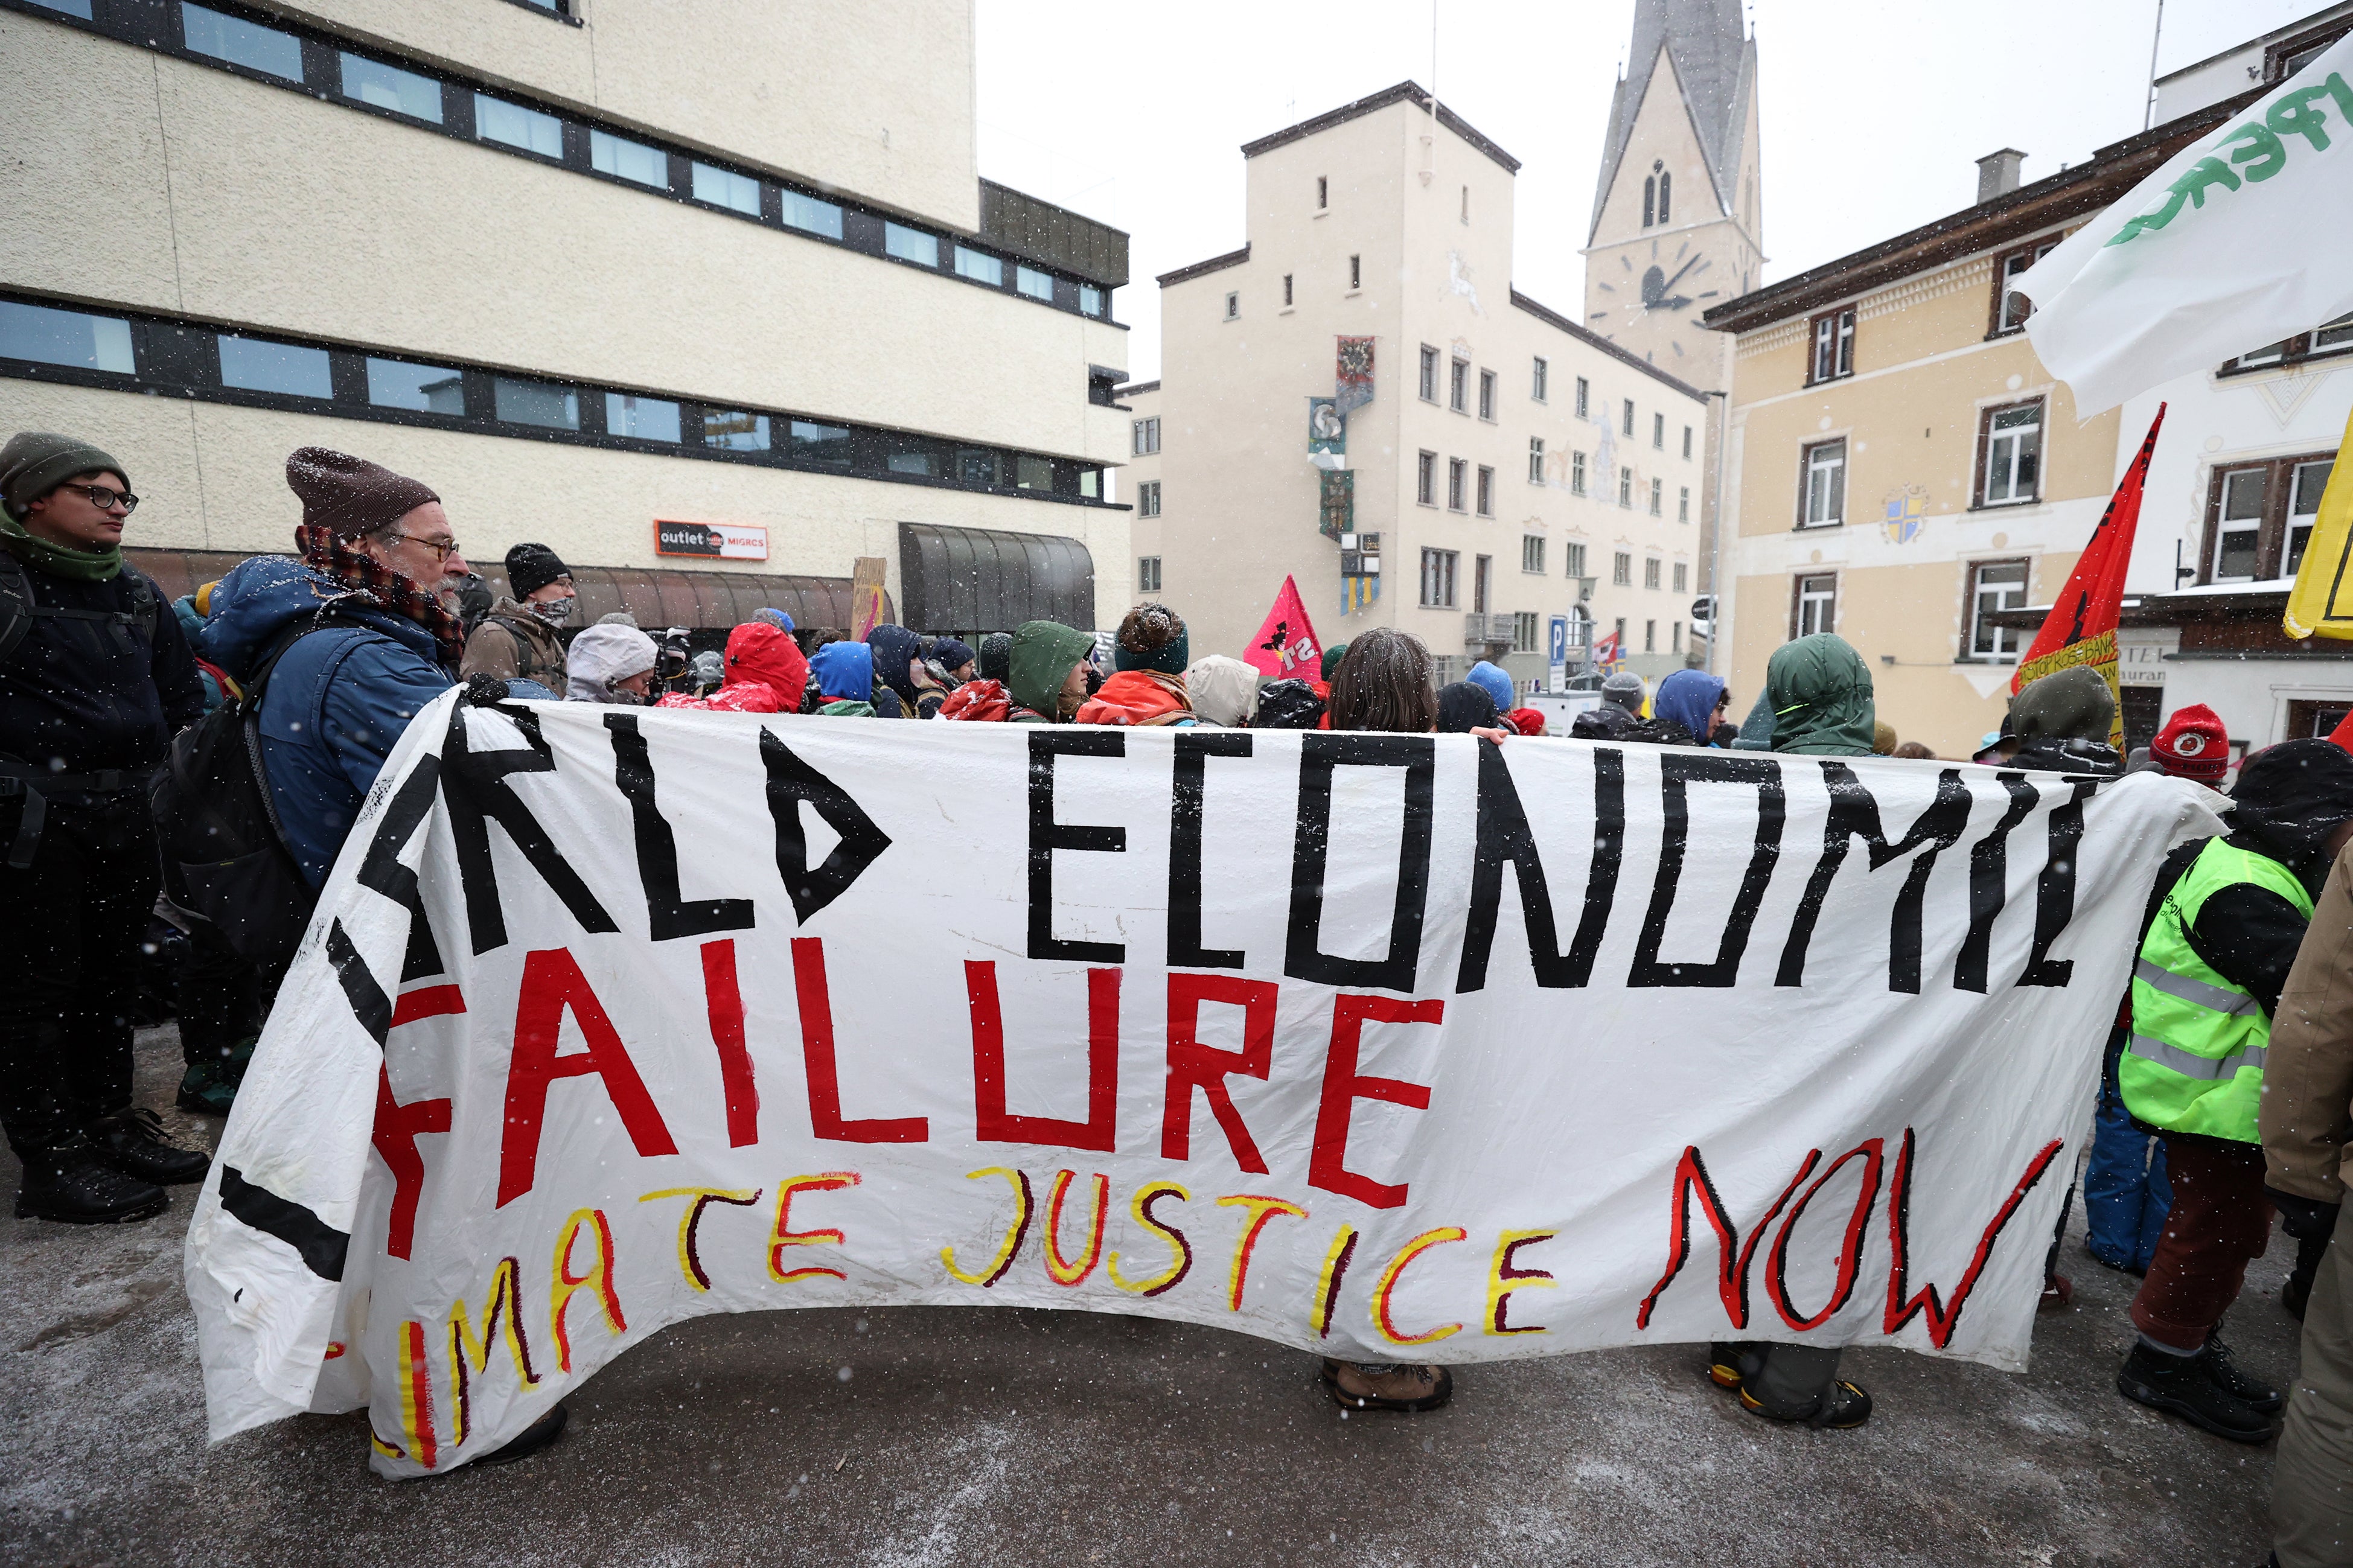 Activists take part in a protest in Davos on Sunday to raise awareness on climate change prior to the WEF annual meeting